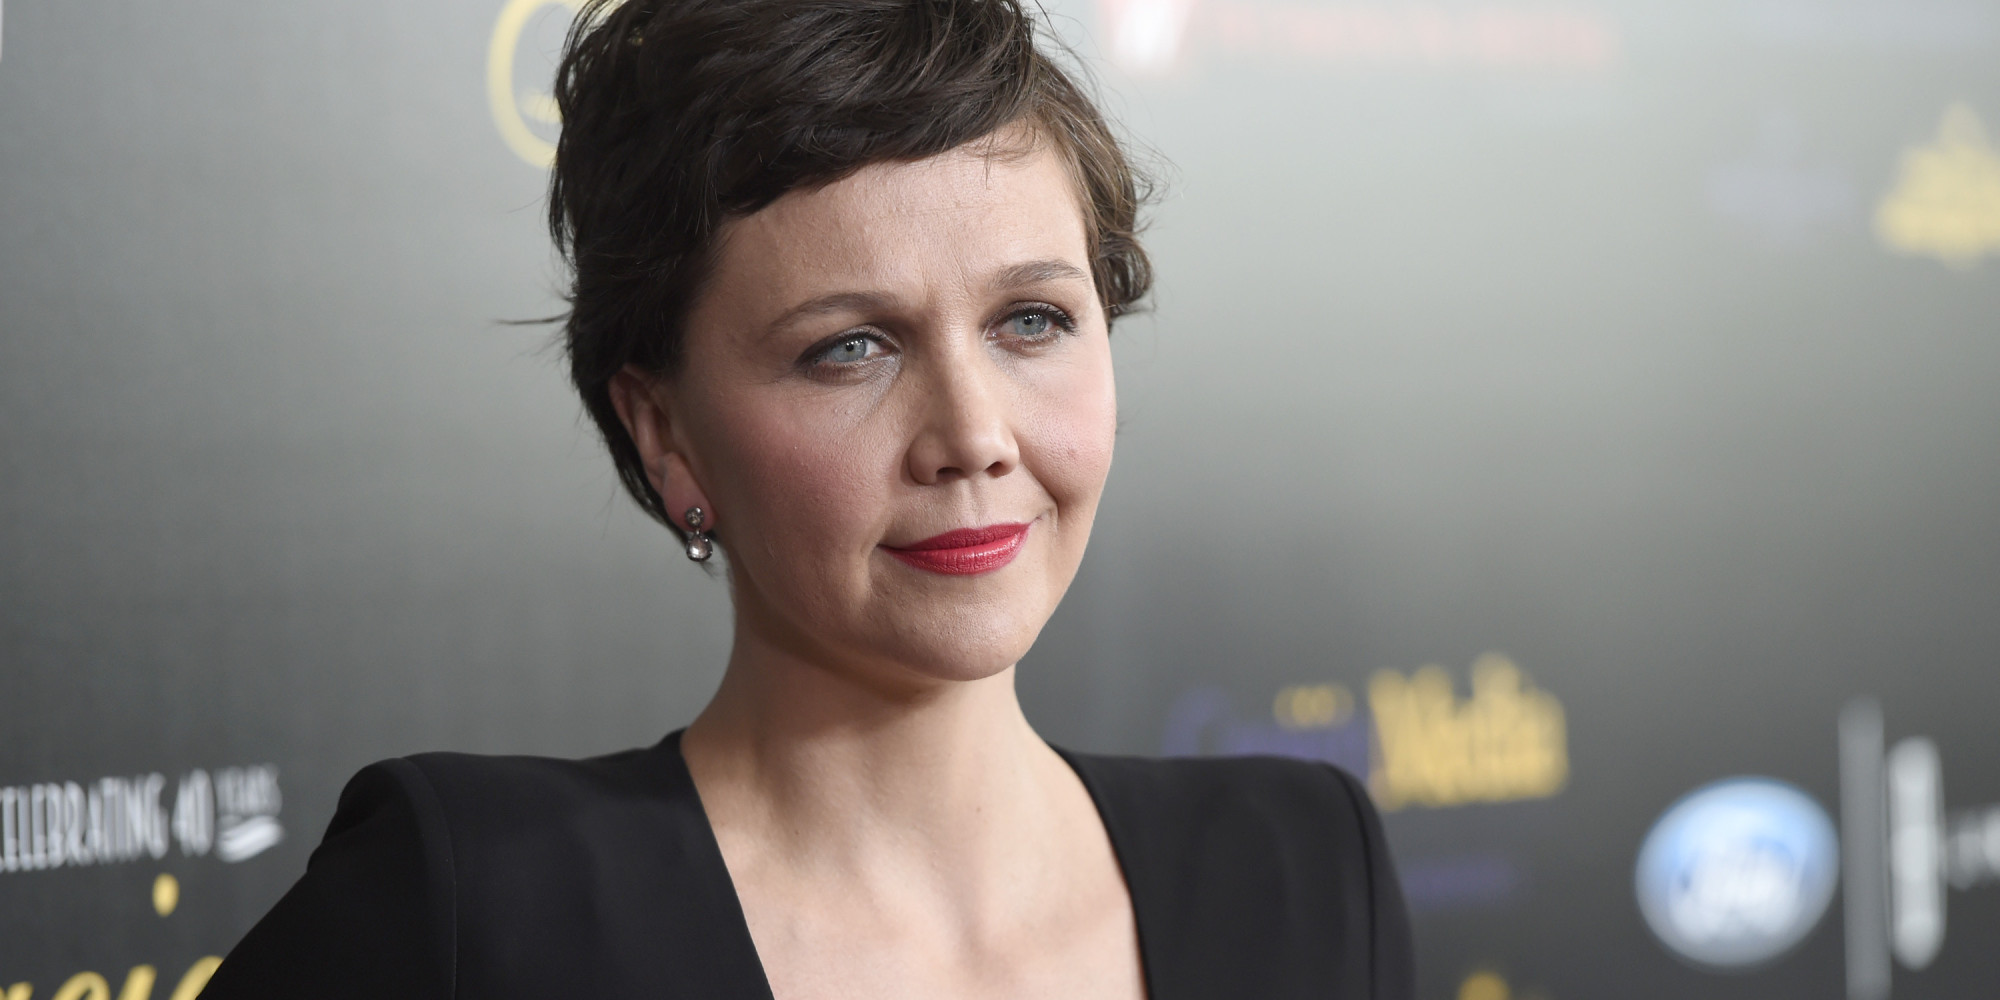 Maggie Gyllenhaal Backgrounds, Compatible - PC, Mobile, Gadgets| 2000x1000 px